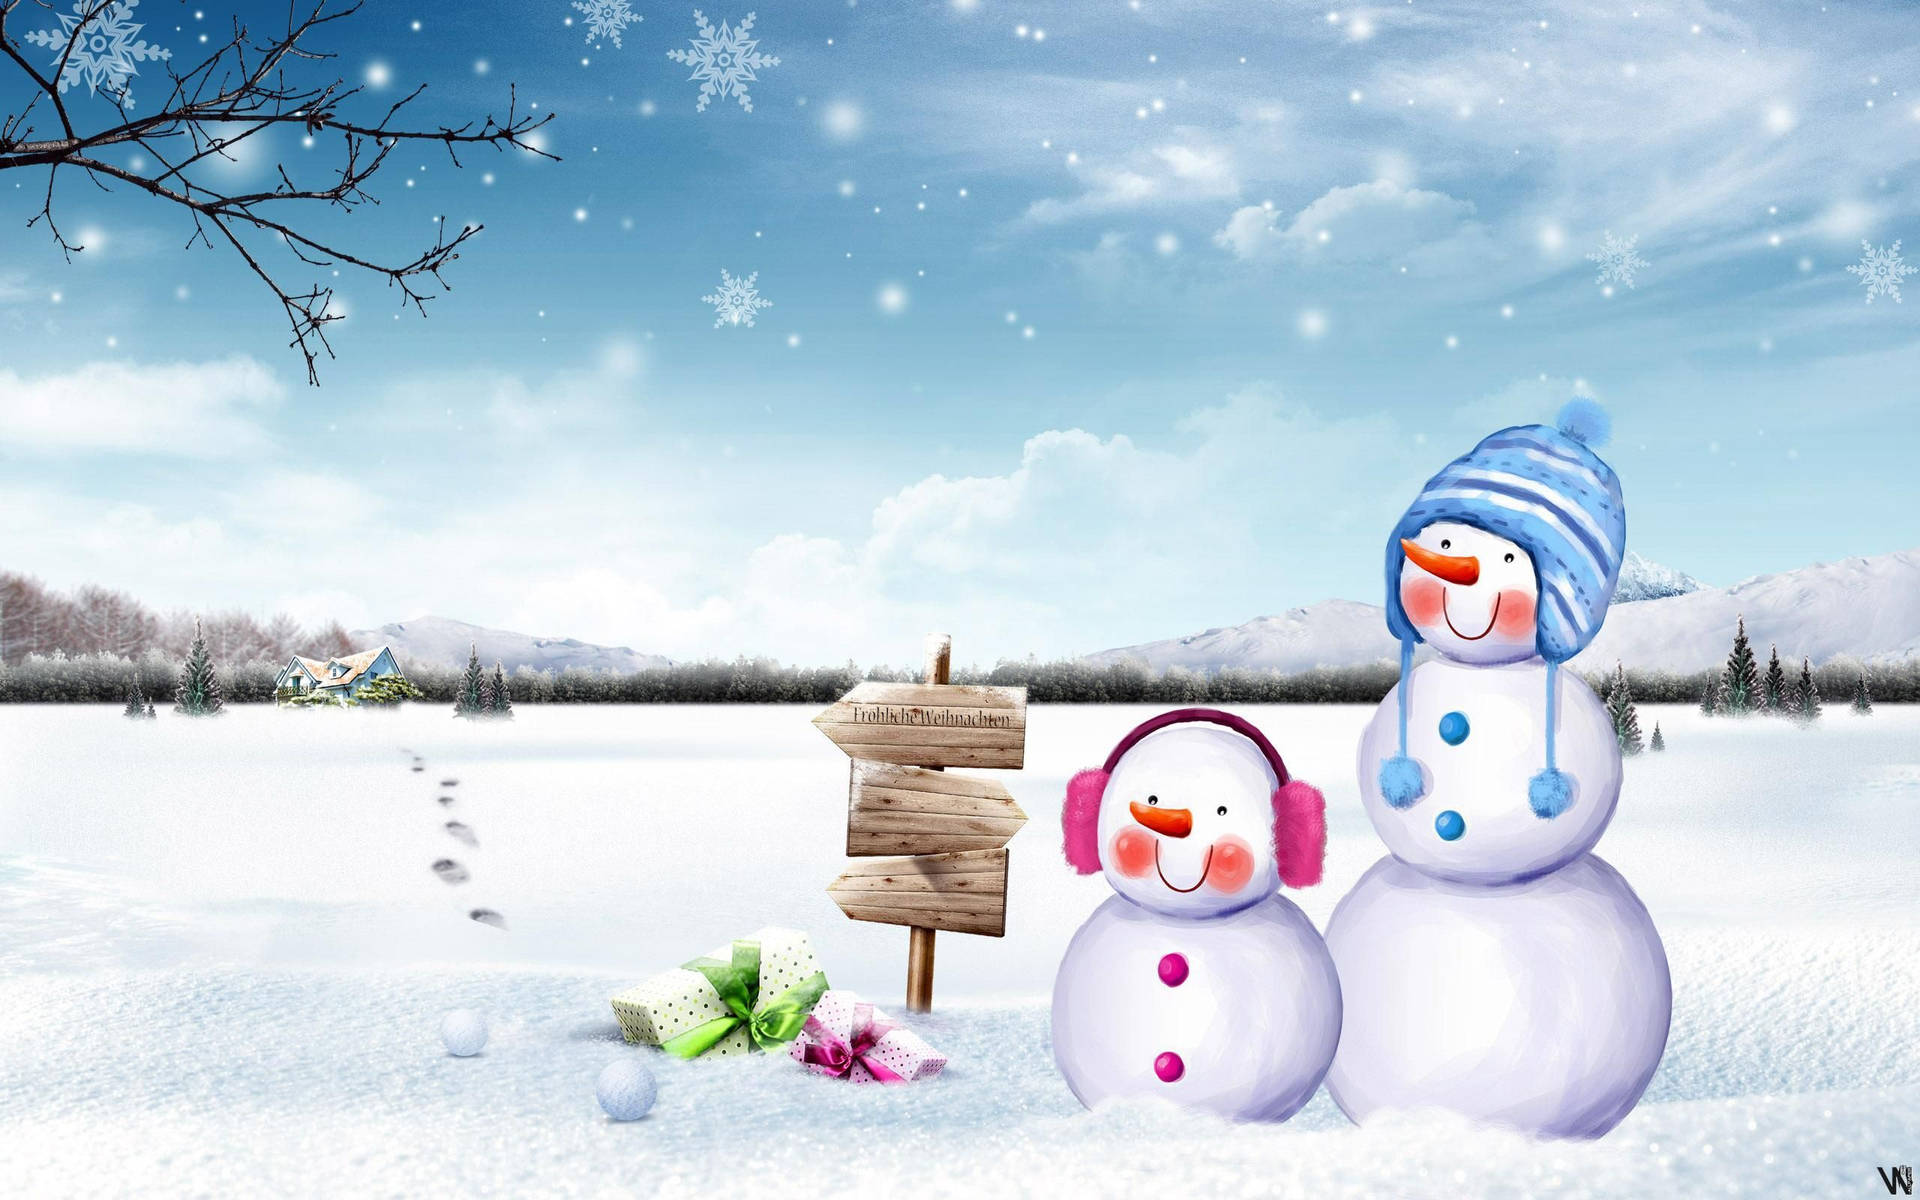 A Snowy Greeting Background